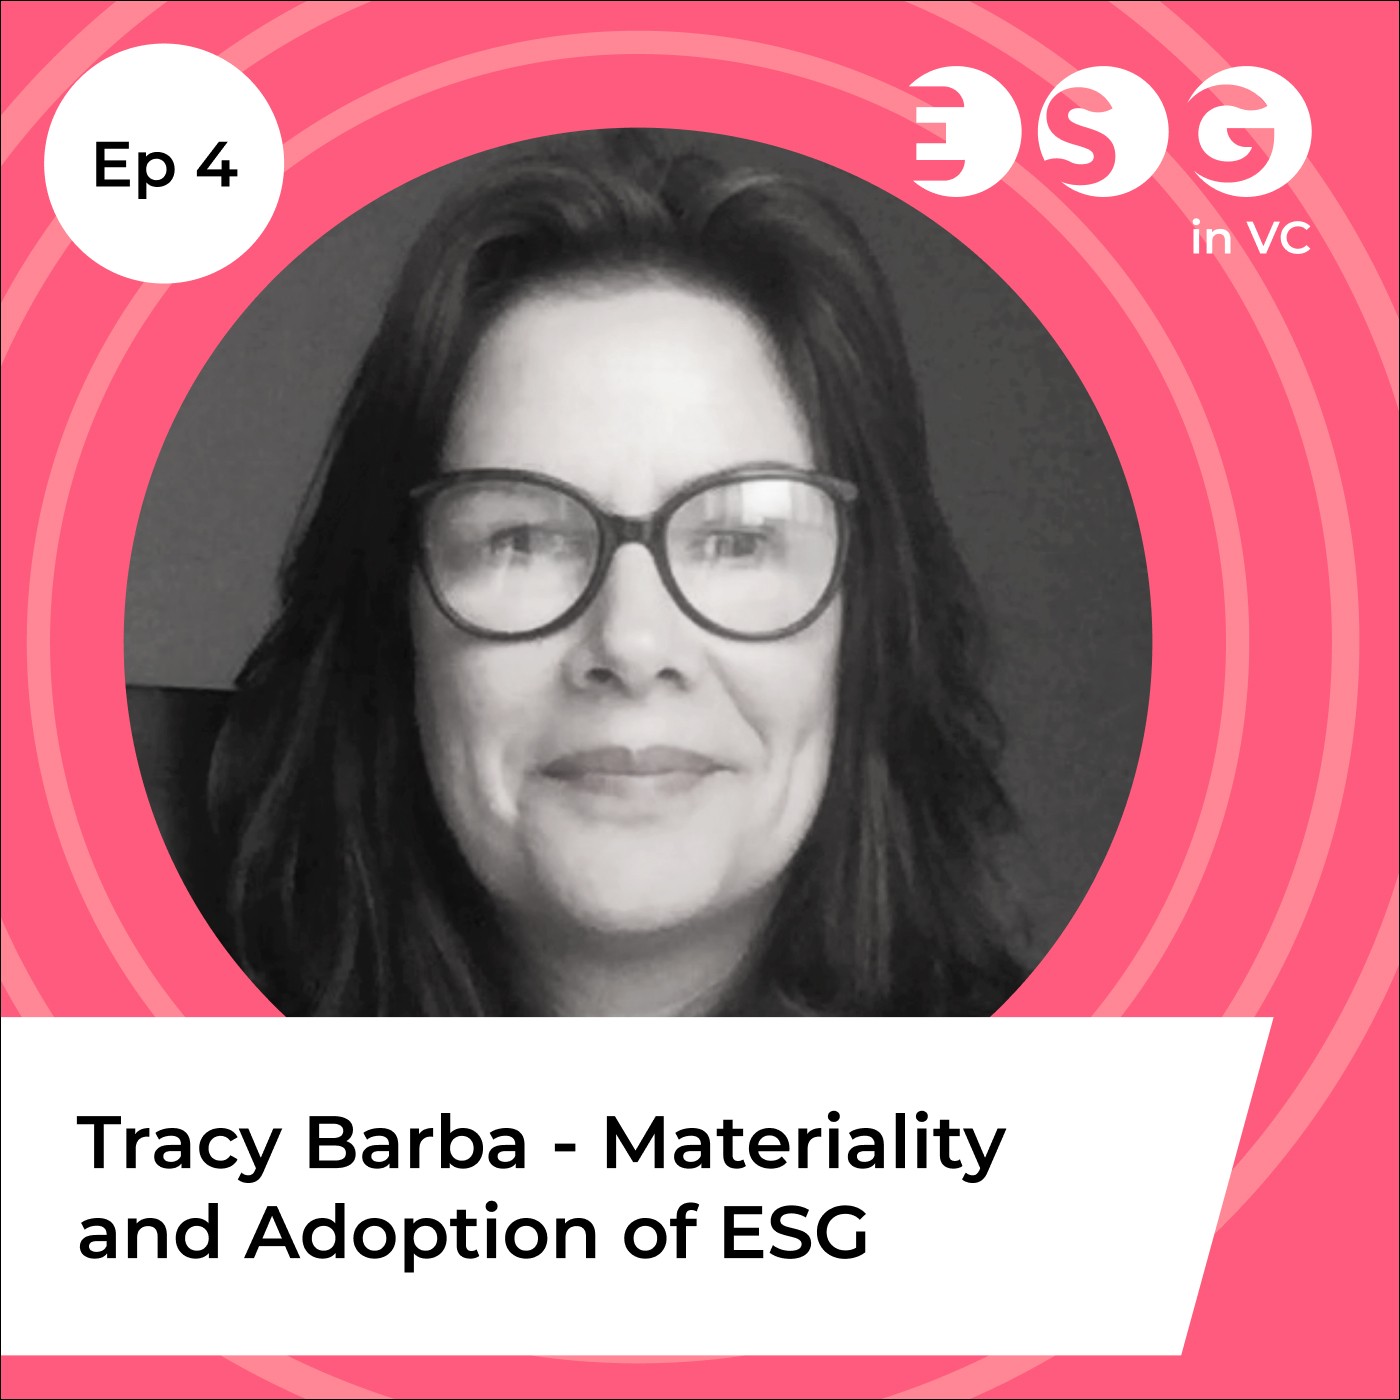 Ep 4 - Tracy Barba - Materiality and Adoption of ESG